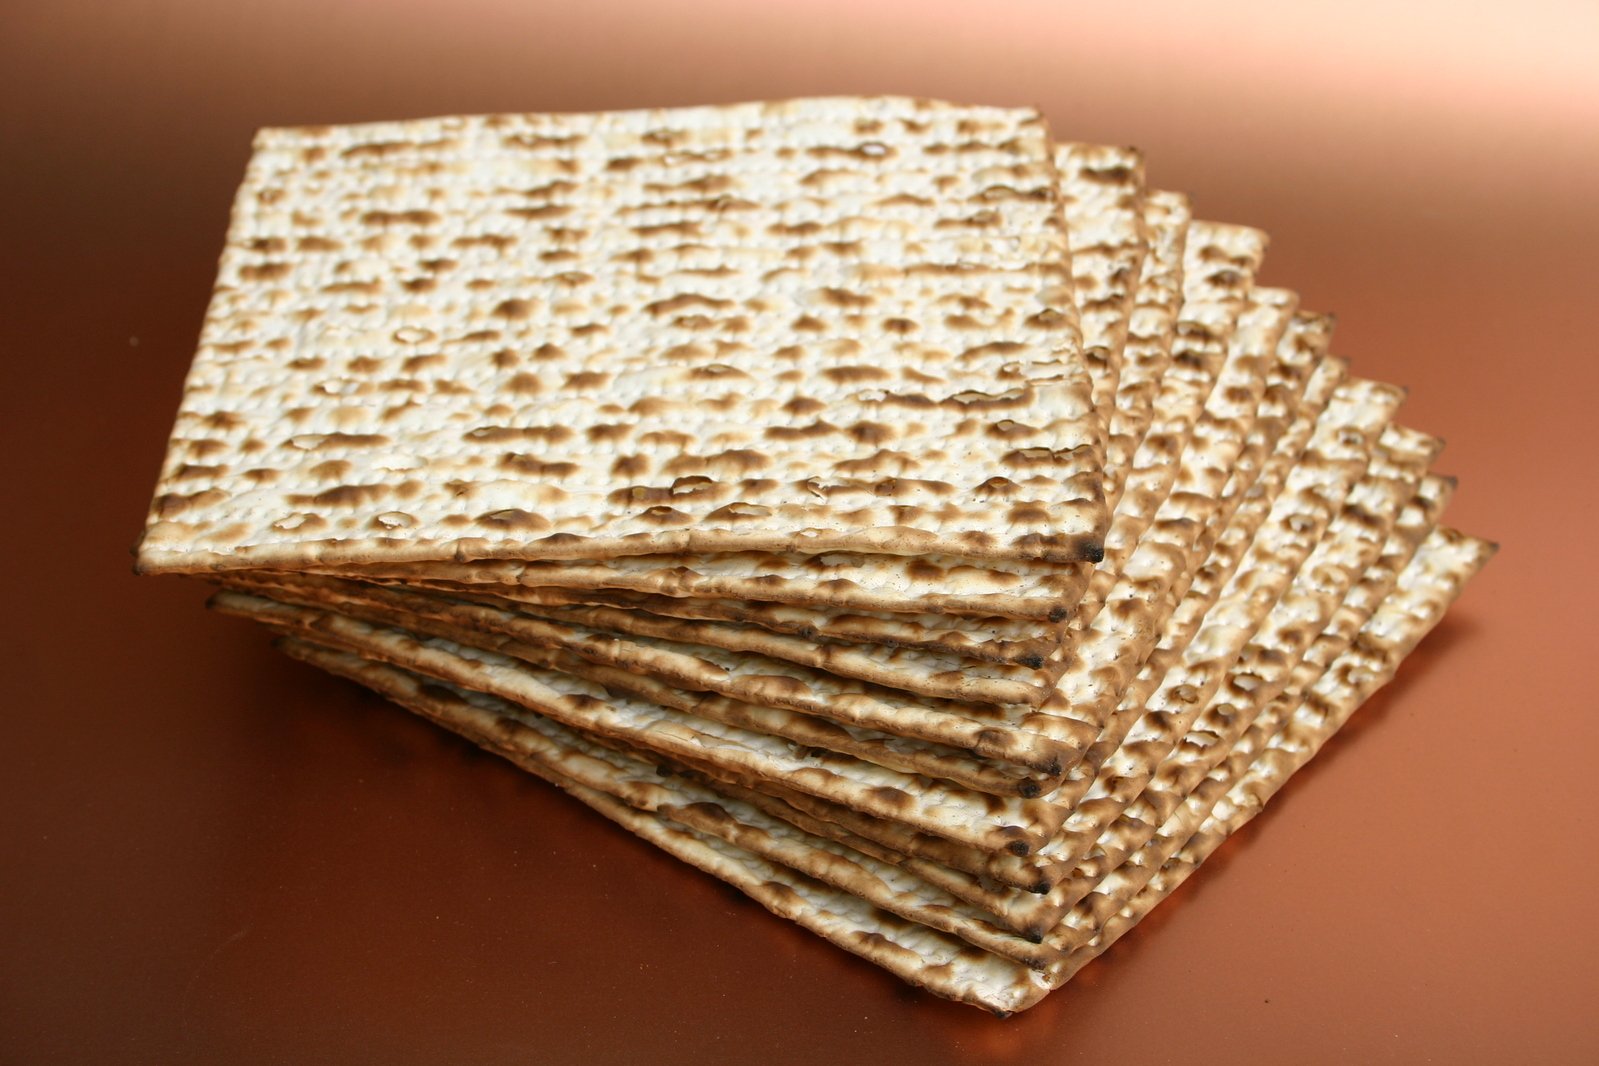 You are currently viewing The Feast of Unleavened Bread and Living a Holy Life Pleasing to God